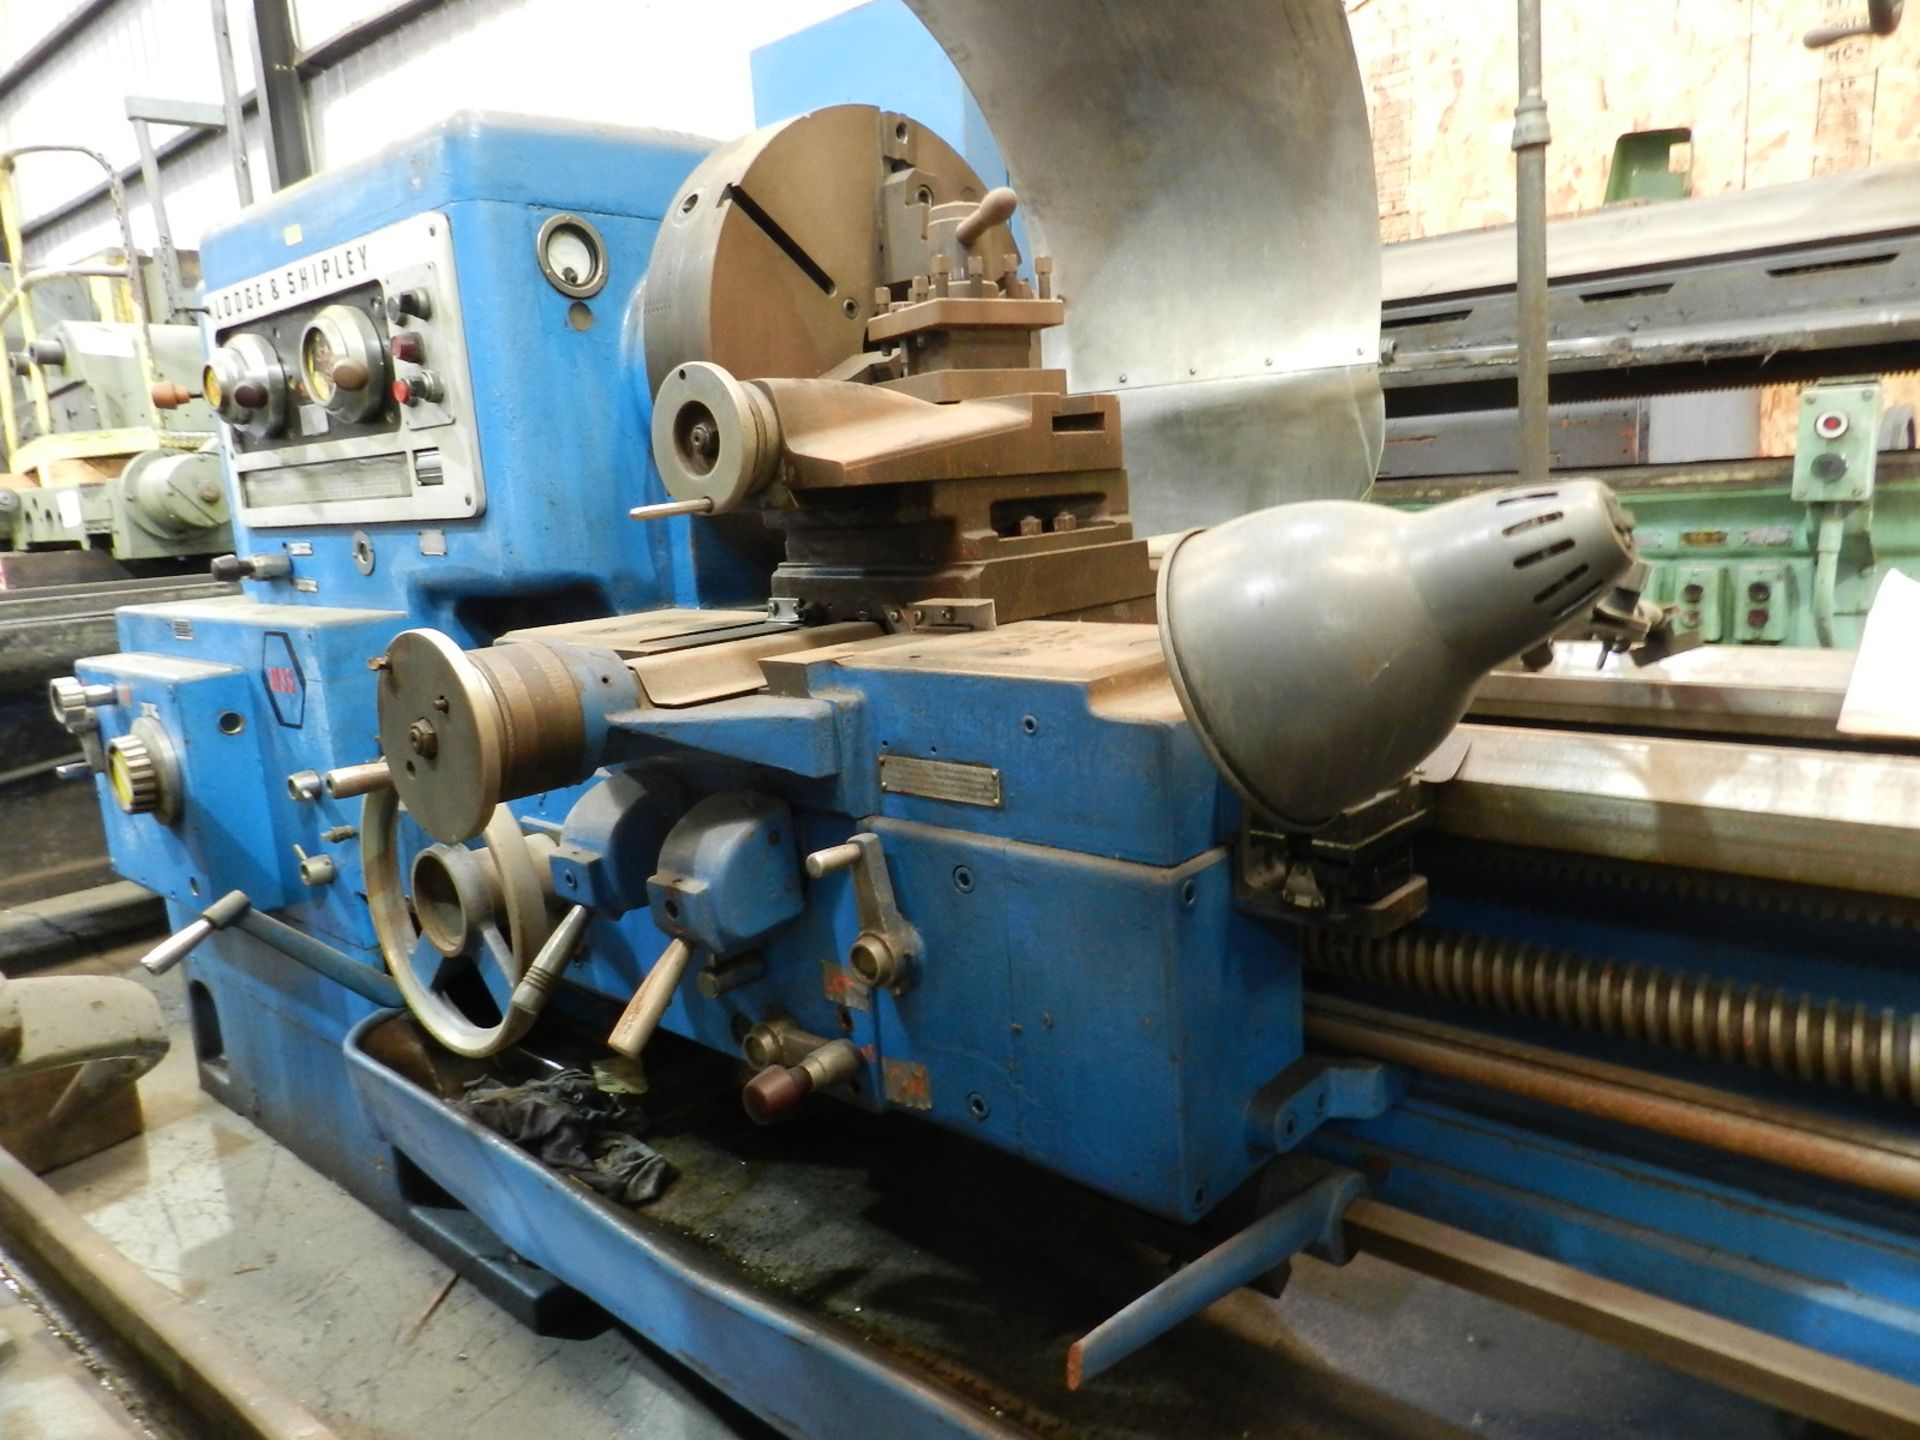 LODGE & SHIPLEY M35 ENGINE LATHE, 96" BETWEEN CENTERS, 21" 3-JAW CHUCK, TAILSTOCK - Image 5 of 16